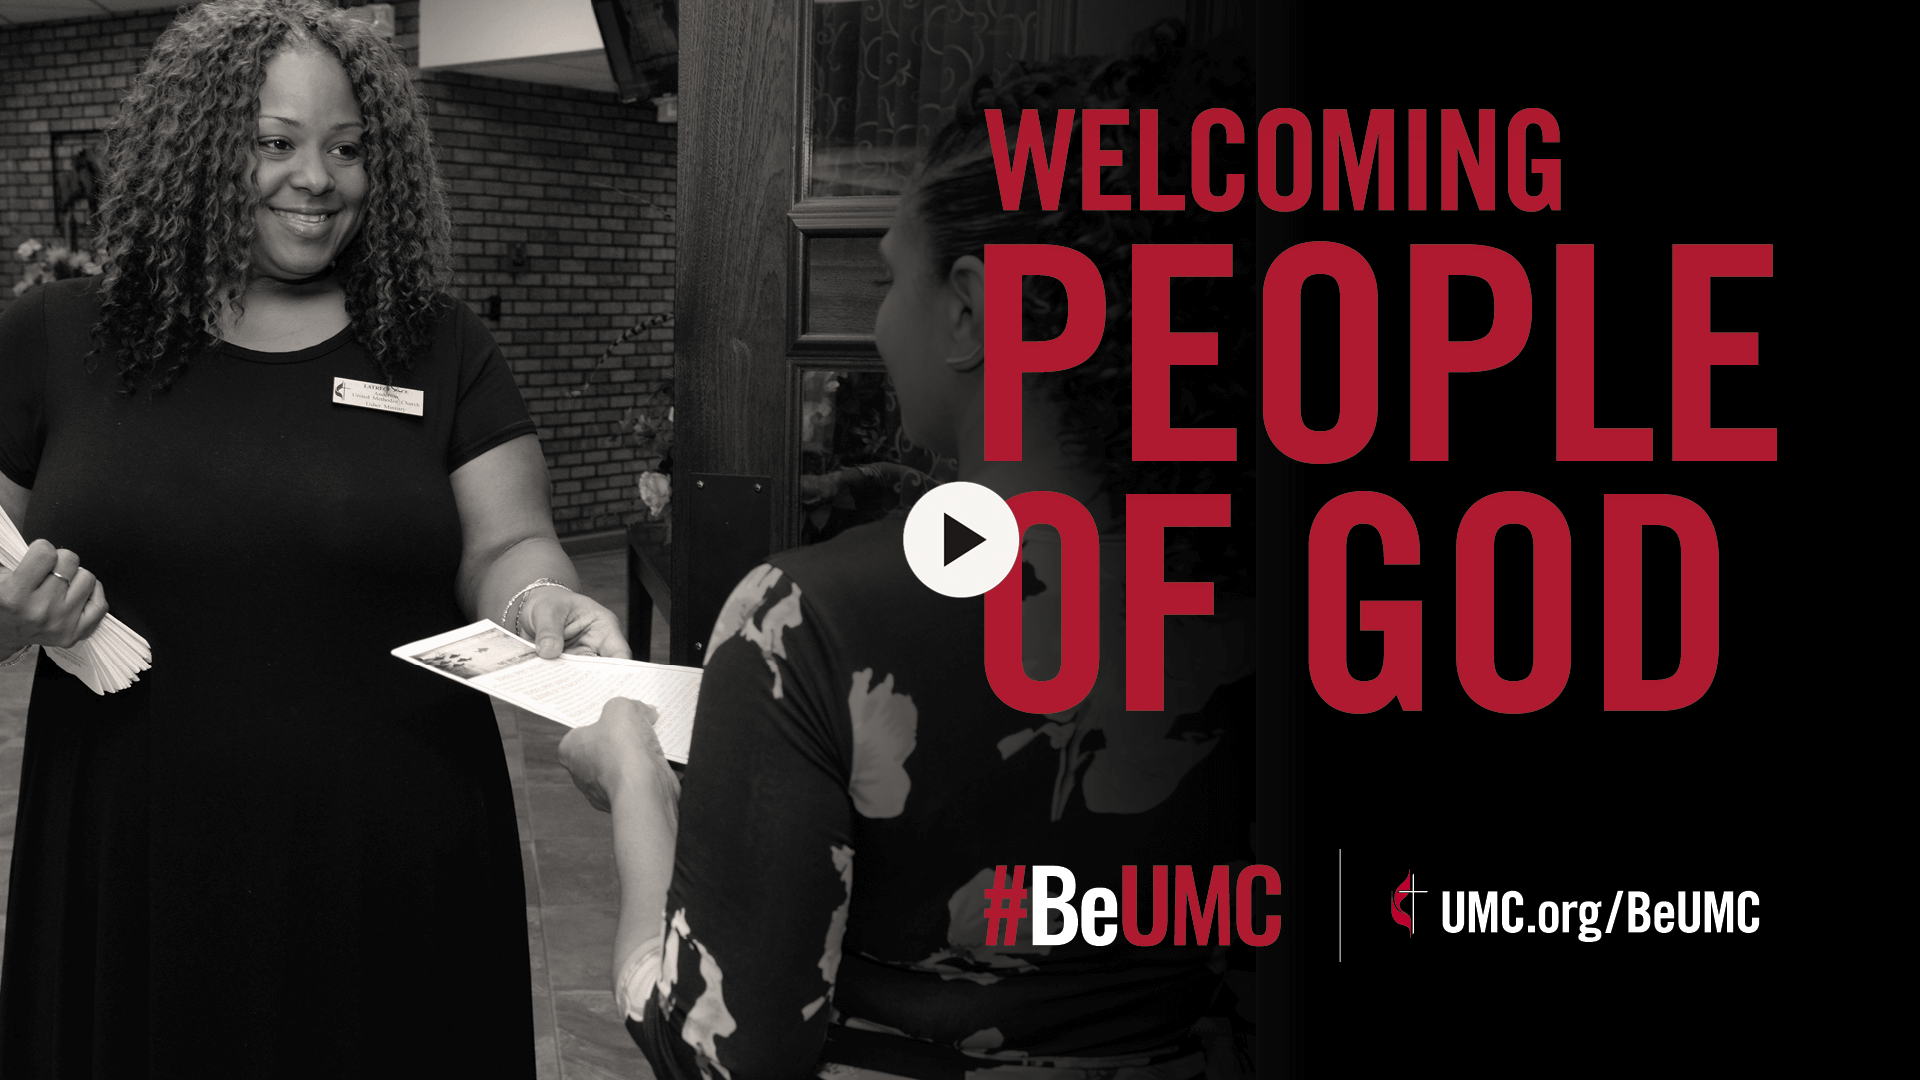 The #BeUMC campaign reminds us of who we are at our best. As people of God called The United Methodist Church, we’re faithful followers of Jesus seeking to make the world a better place. Welcoming/Greet (video screenshot).